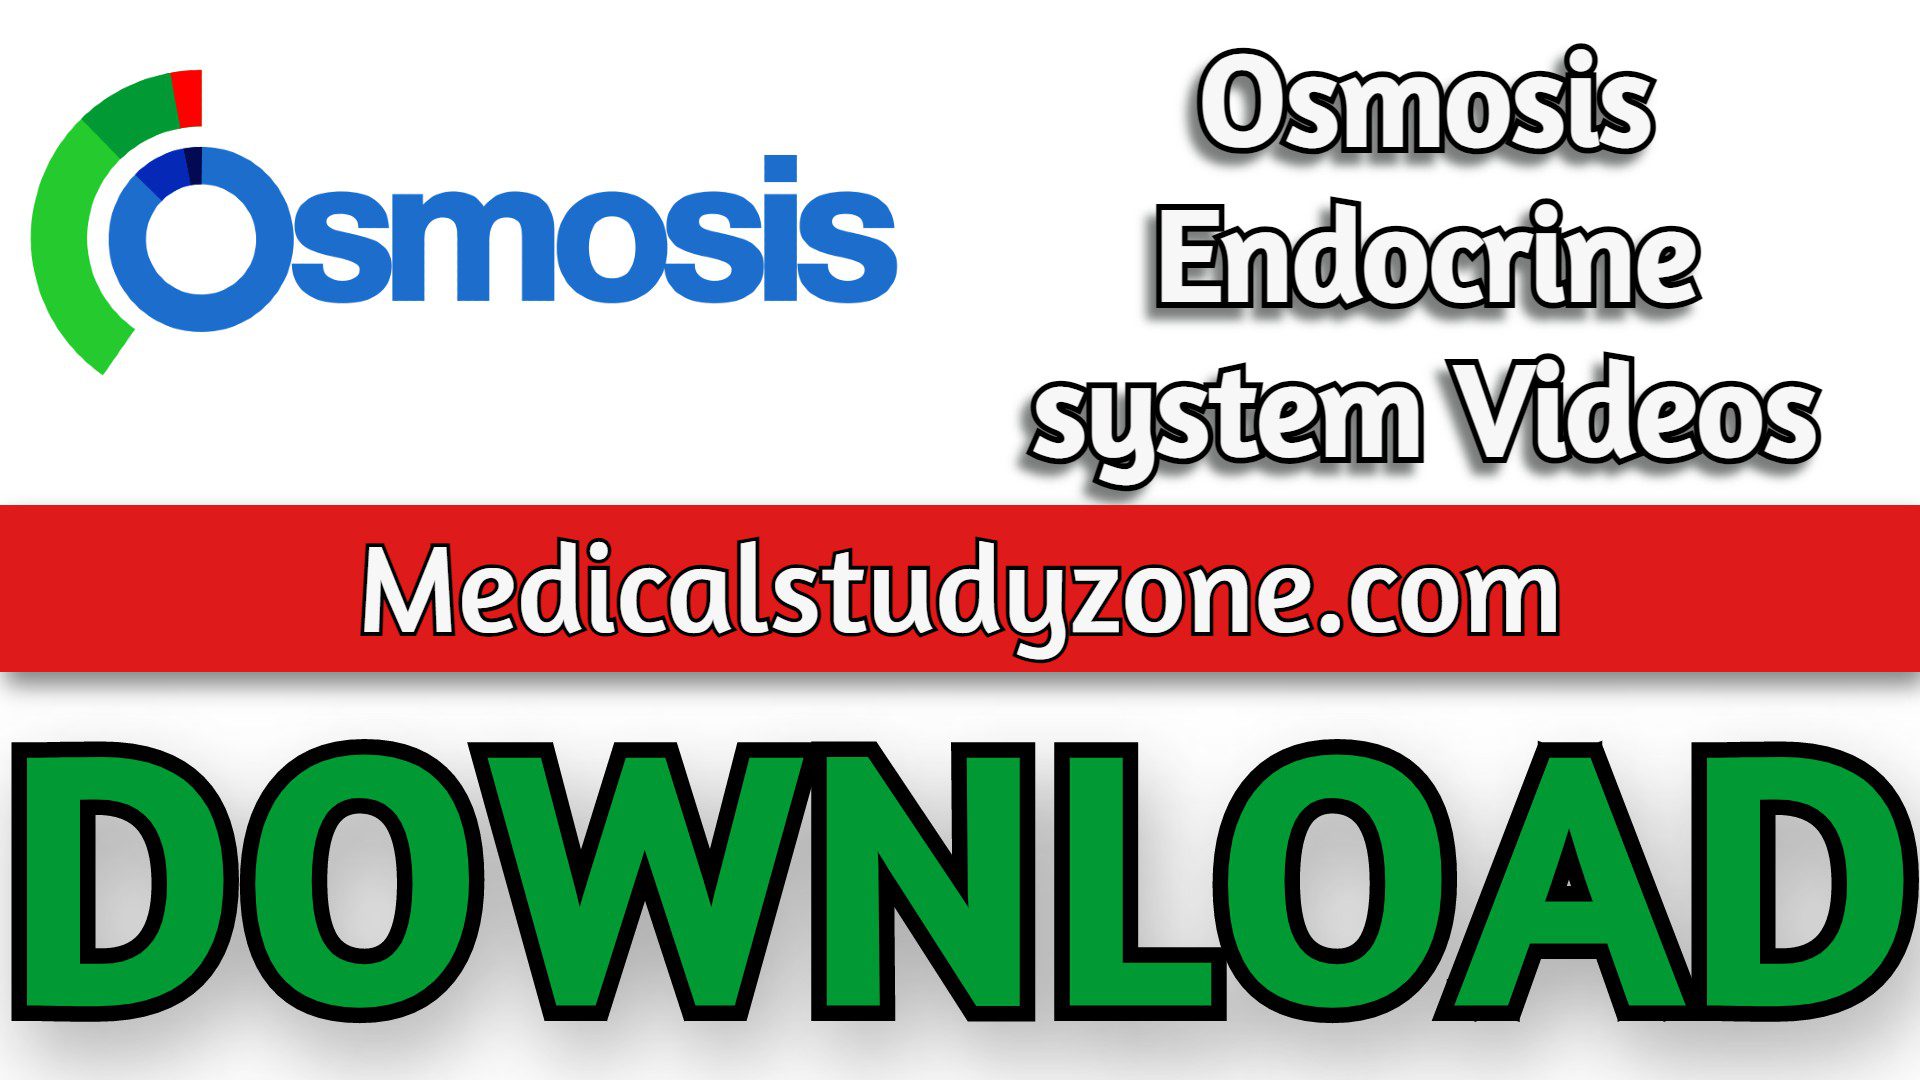 Osmosis Endocrine system Videos 2022 Free Download